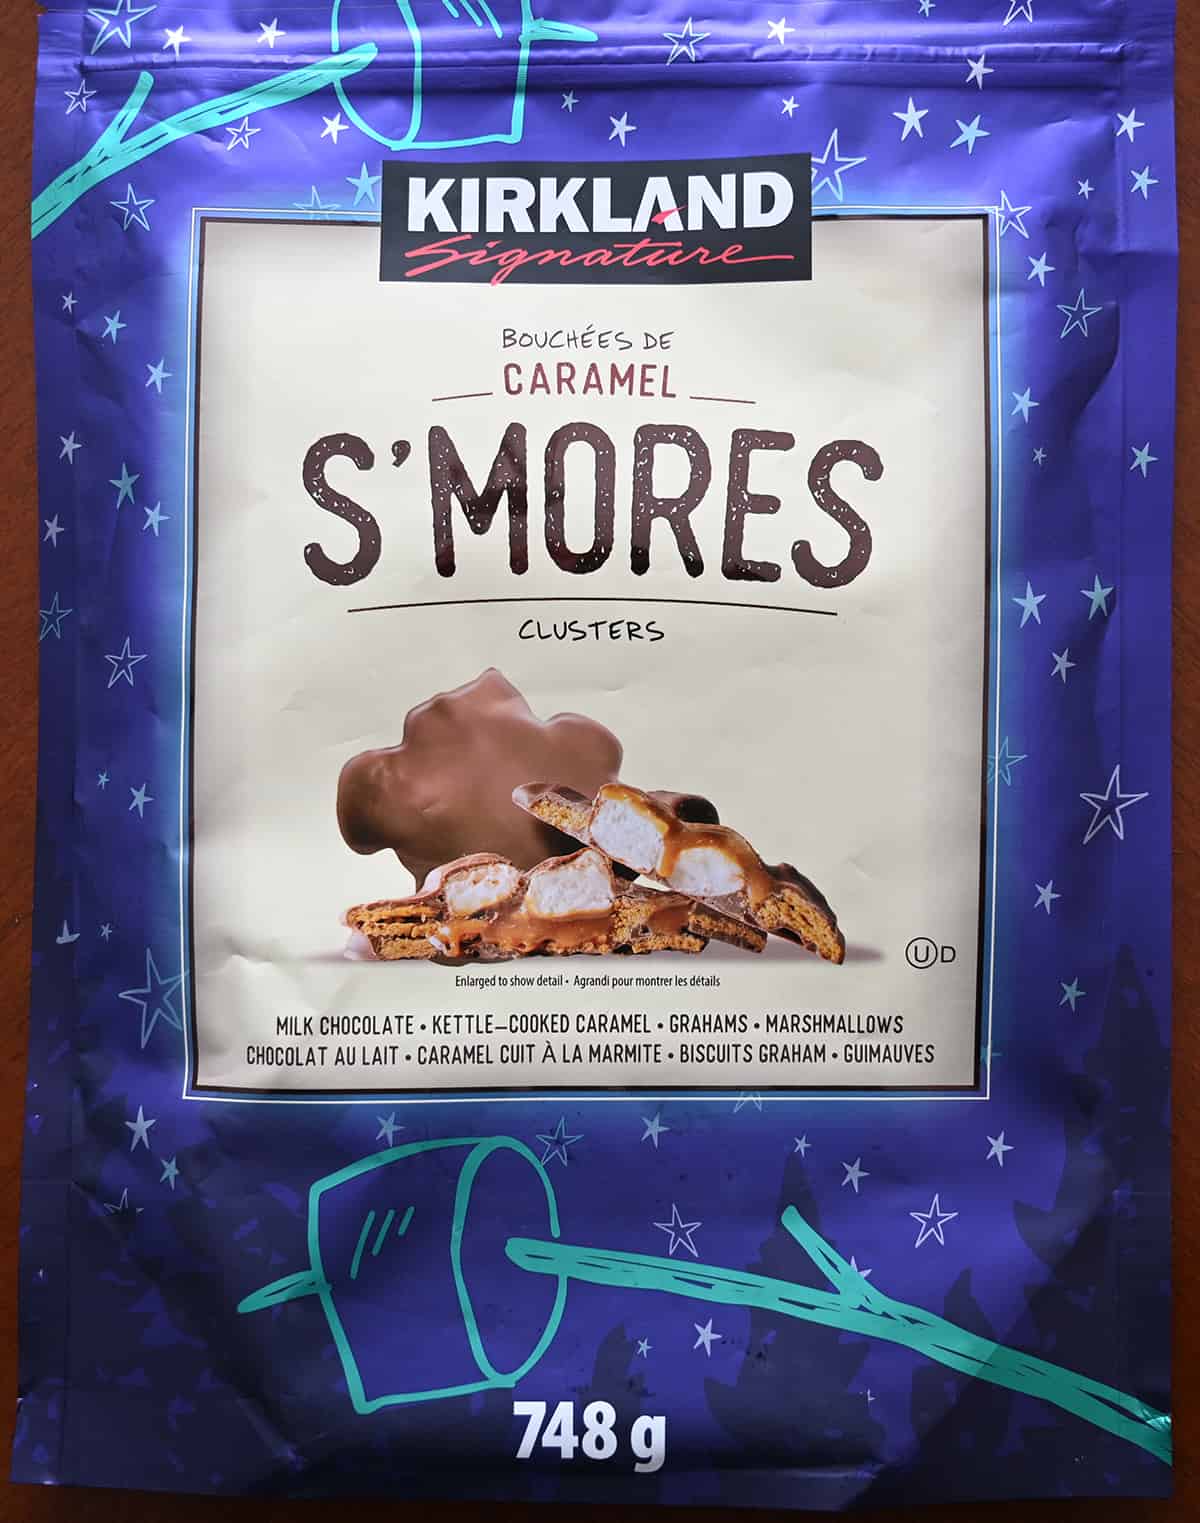 Closeup image of the front of the s'mores bag showing weight of the bag and product description.